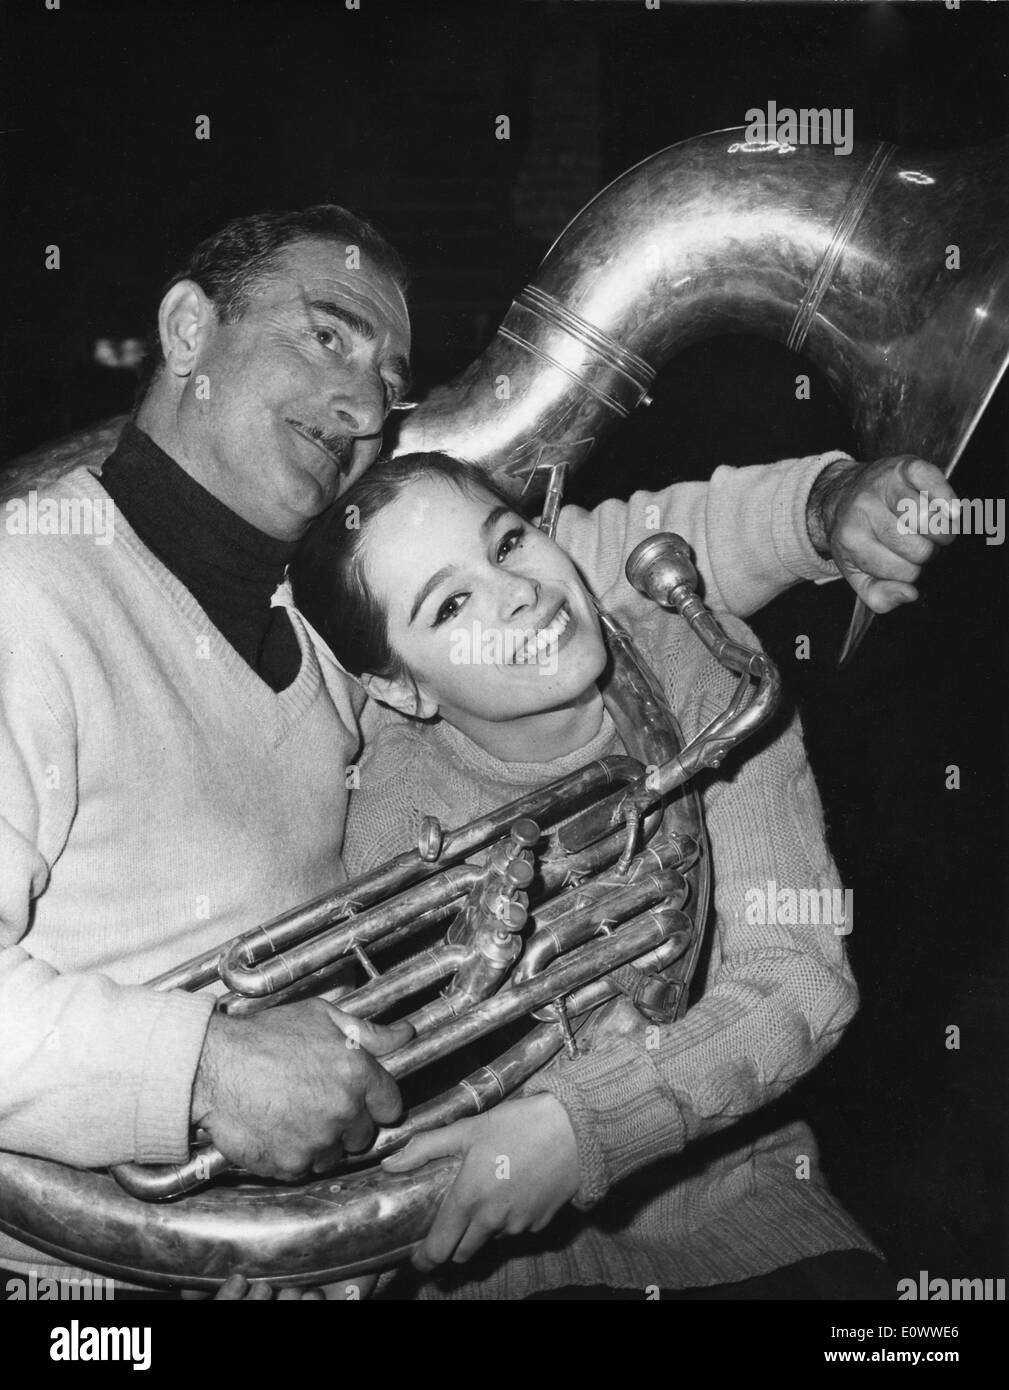 Mar. 17, 1964 - Paris, France - Daughter of the famous Charlie Chaplin, GERALDINE CHAPLIN records a radio show in Paris with guest-star, clown ACHILLE ZAVATTA, where he serenaded her with music. Stock Photo